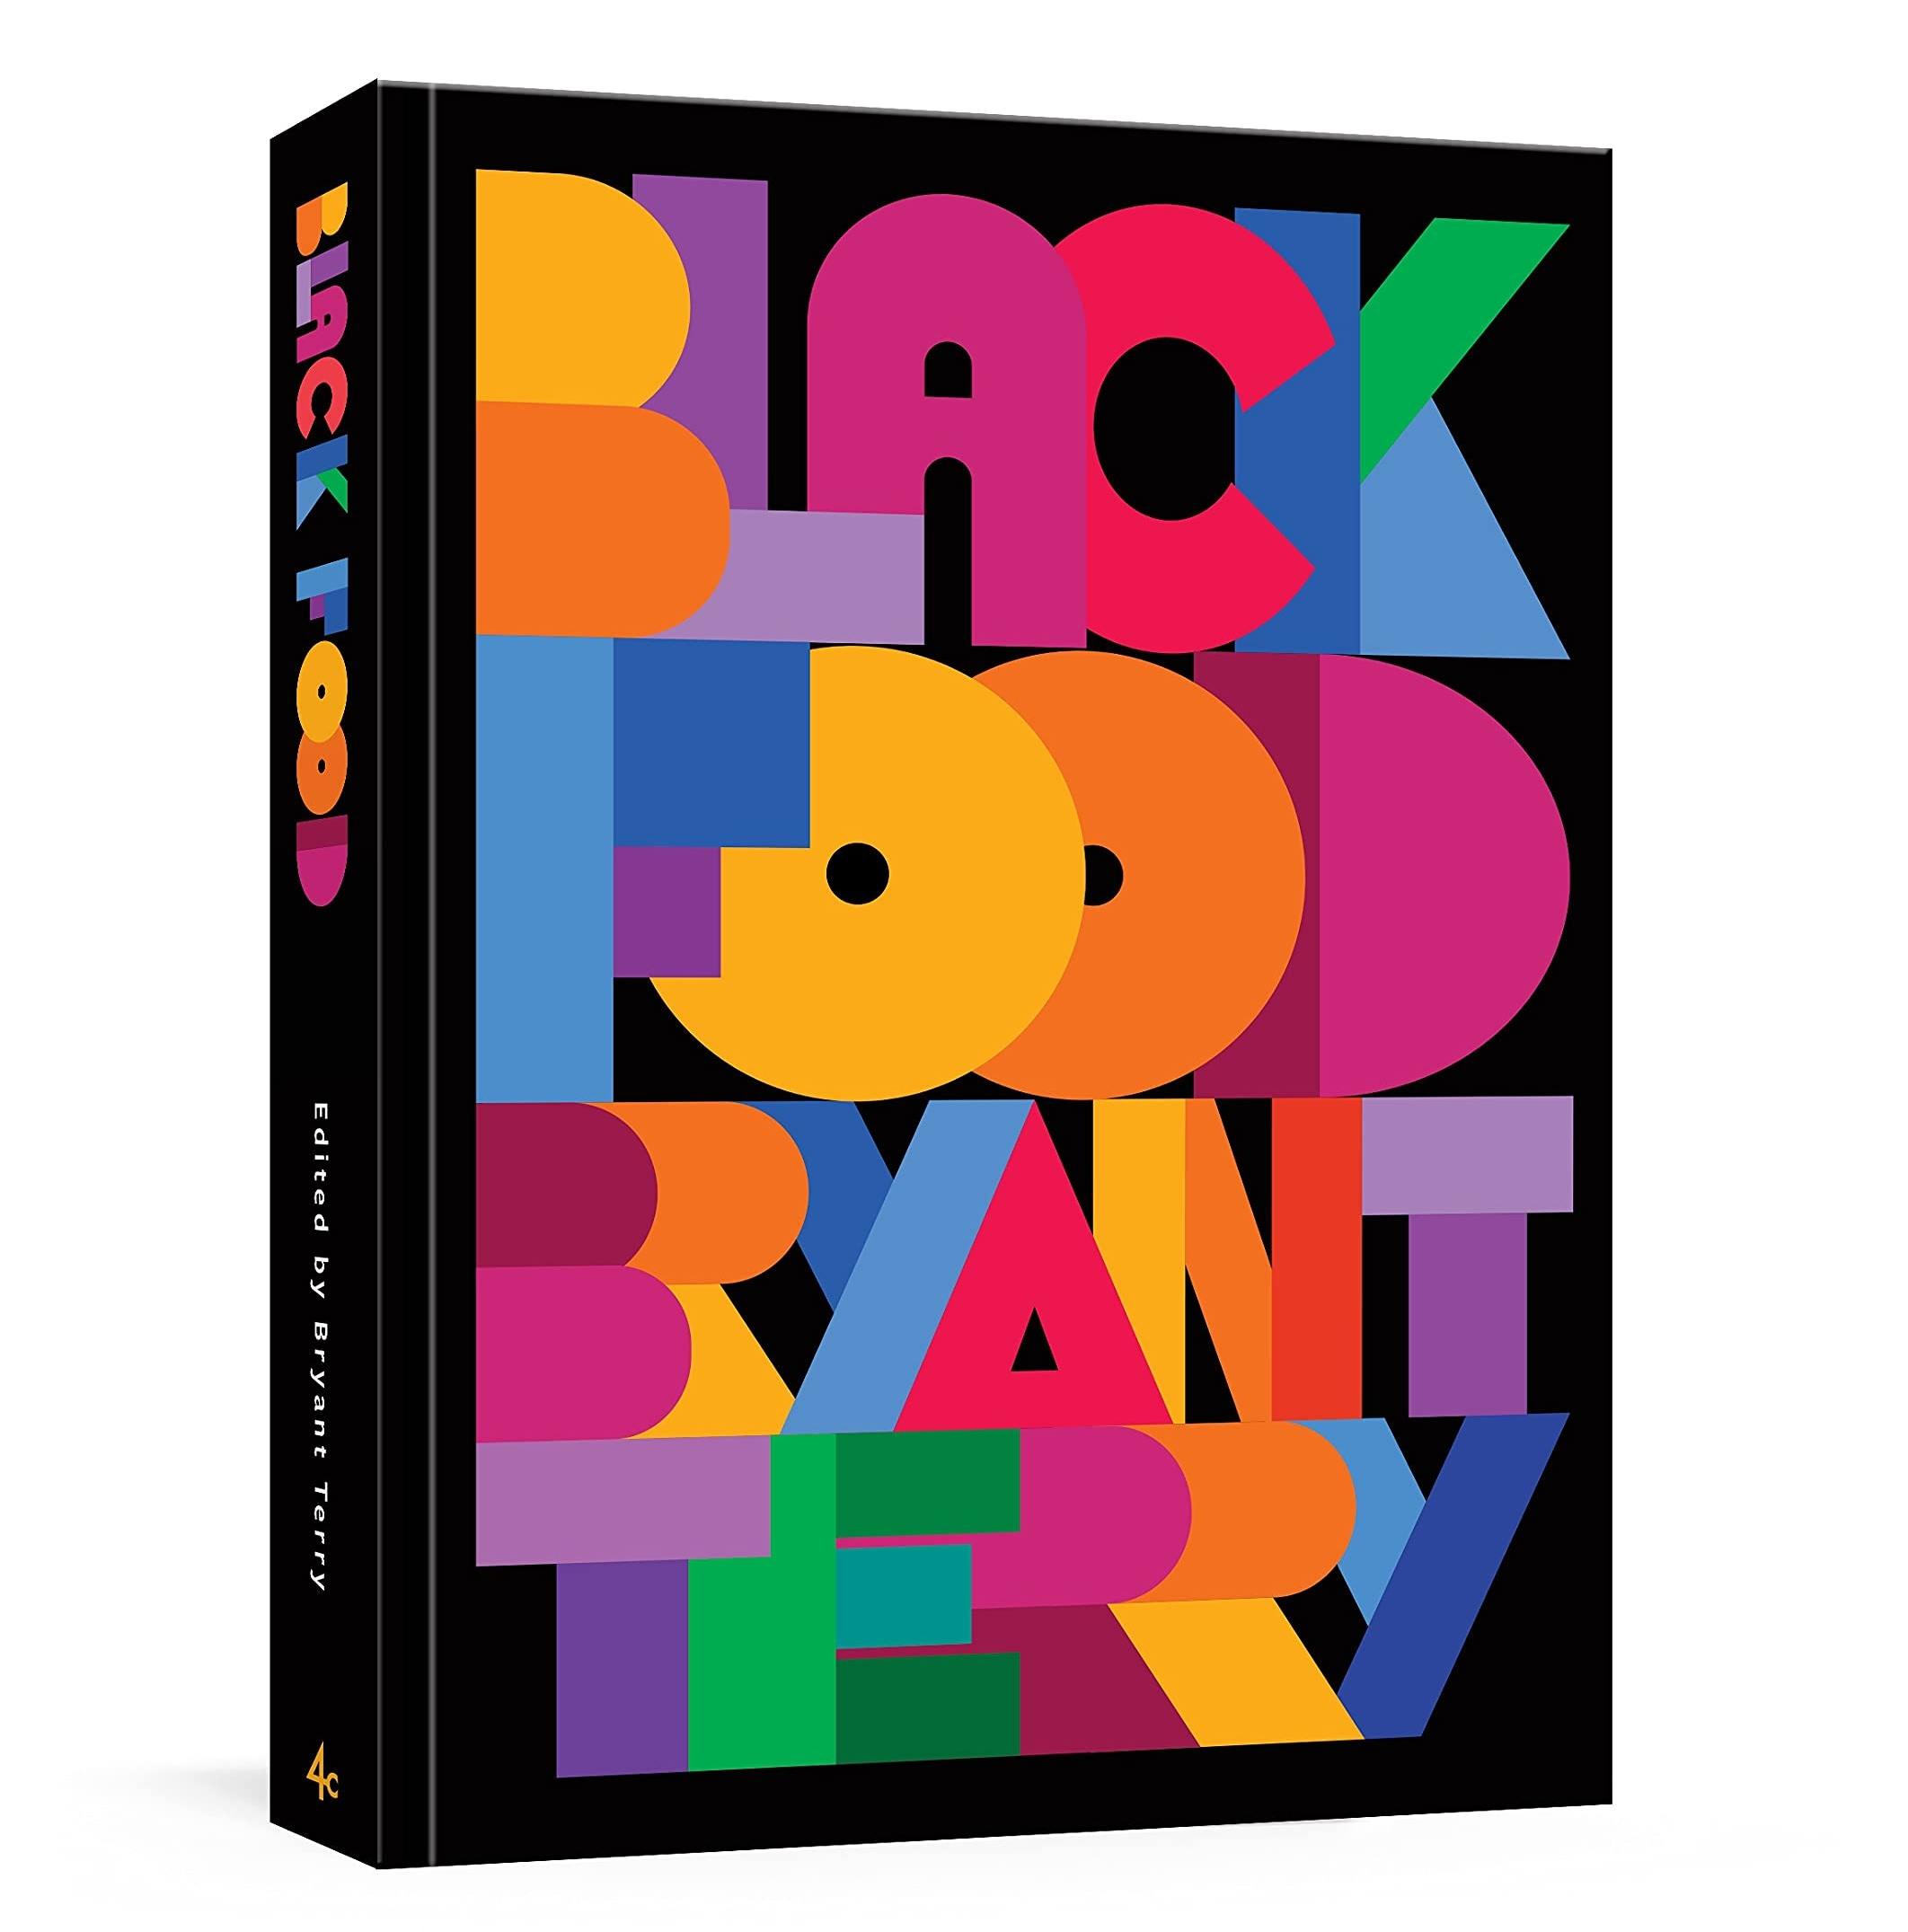 the Black Food cookbook with colorful block lettering on a black background